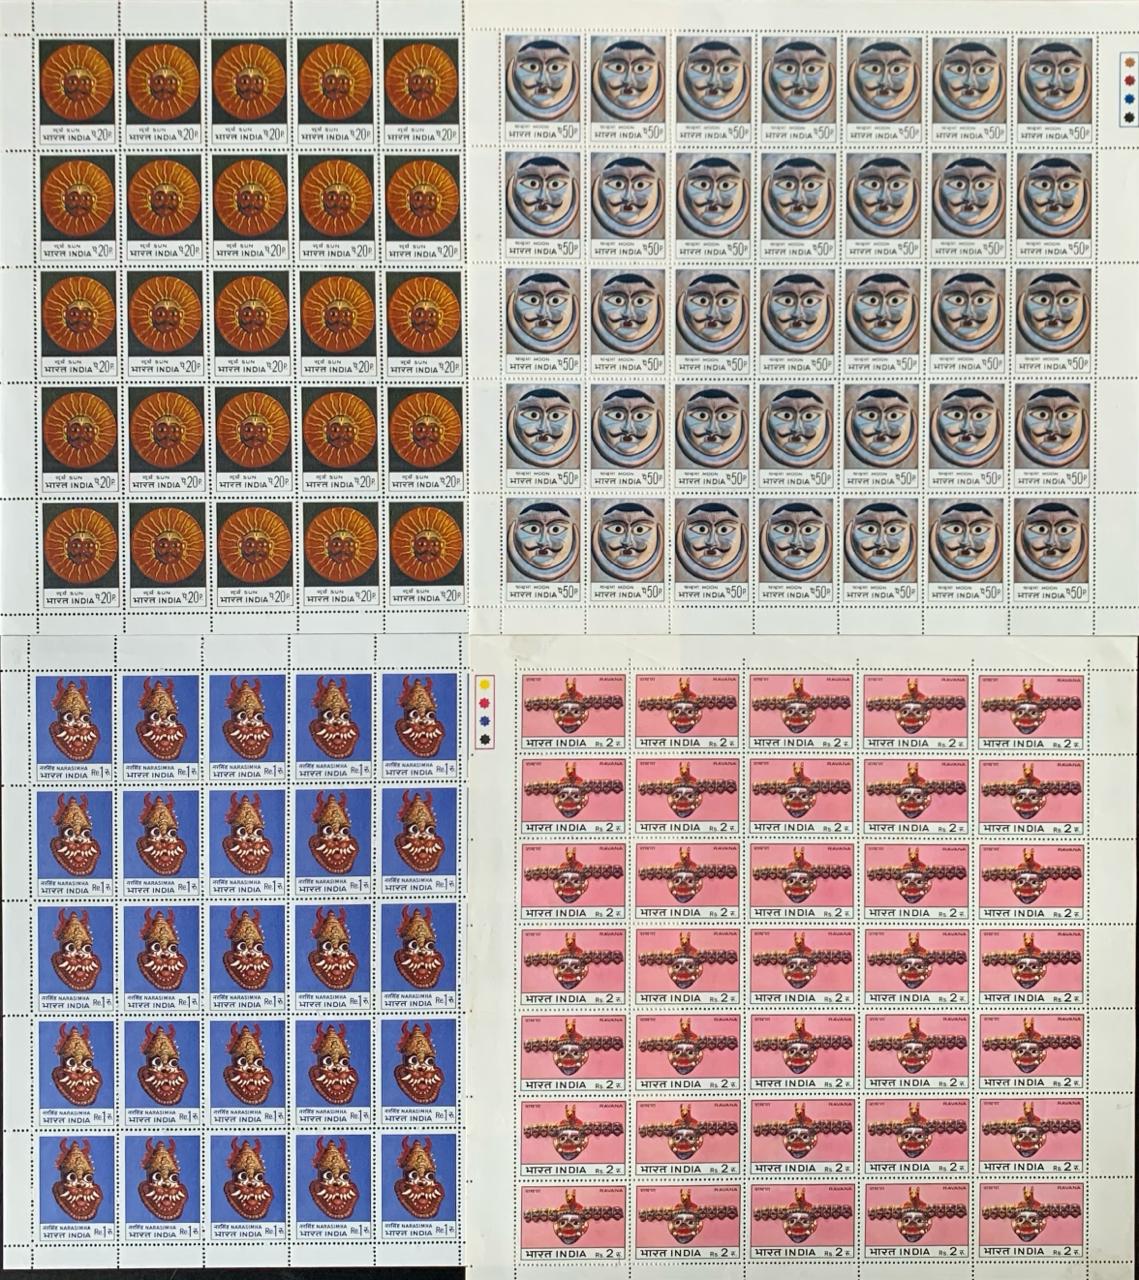 India 1974 Indian Masks Complete Set in Full Sheets